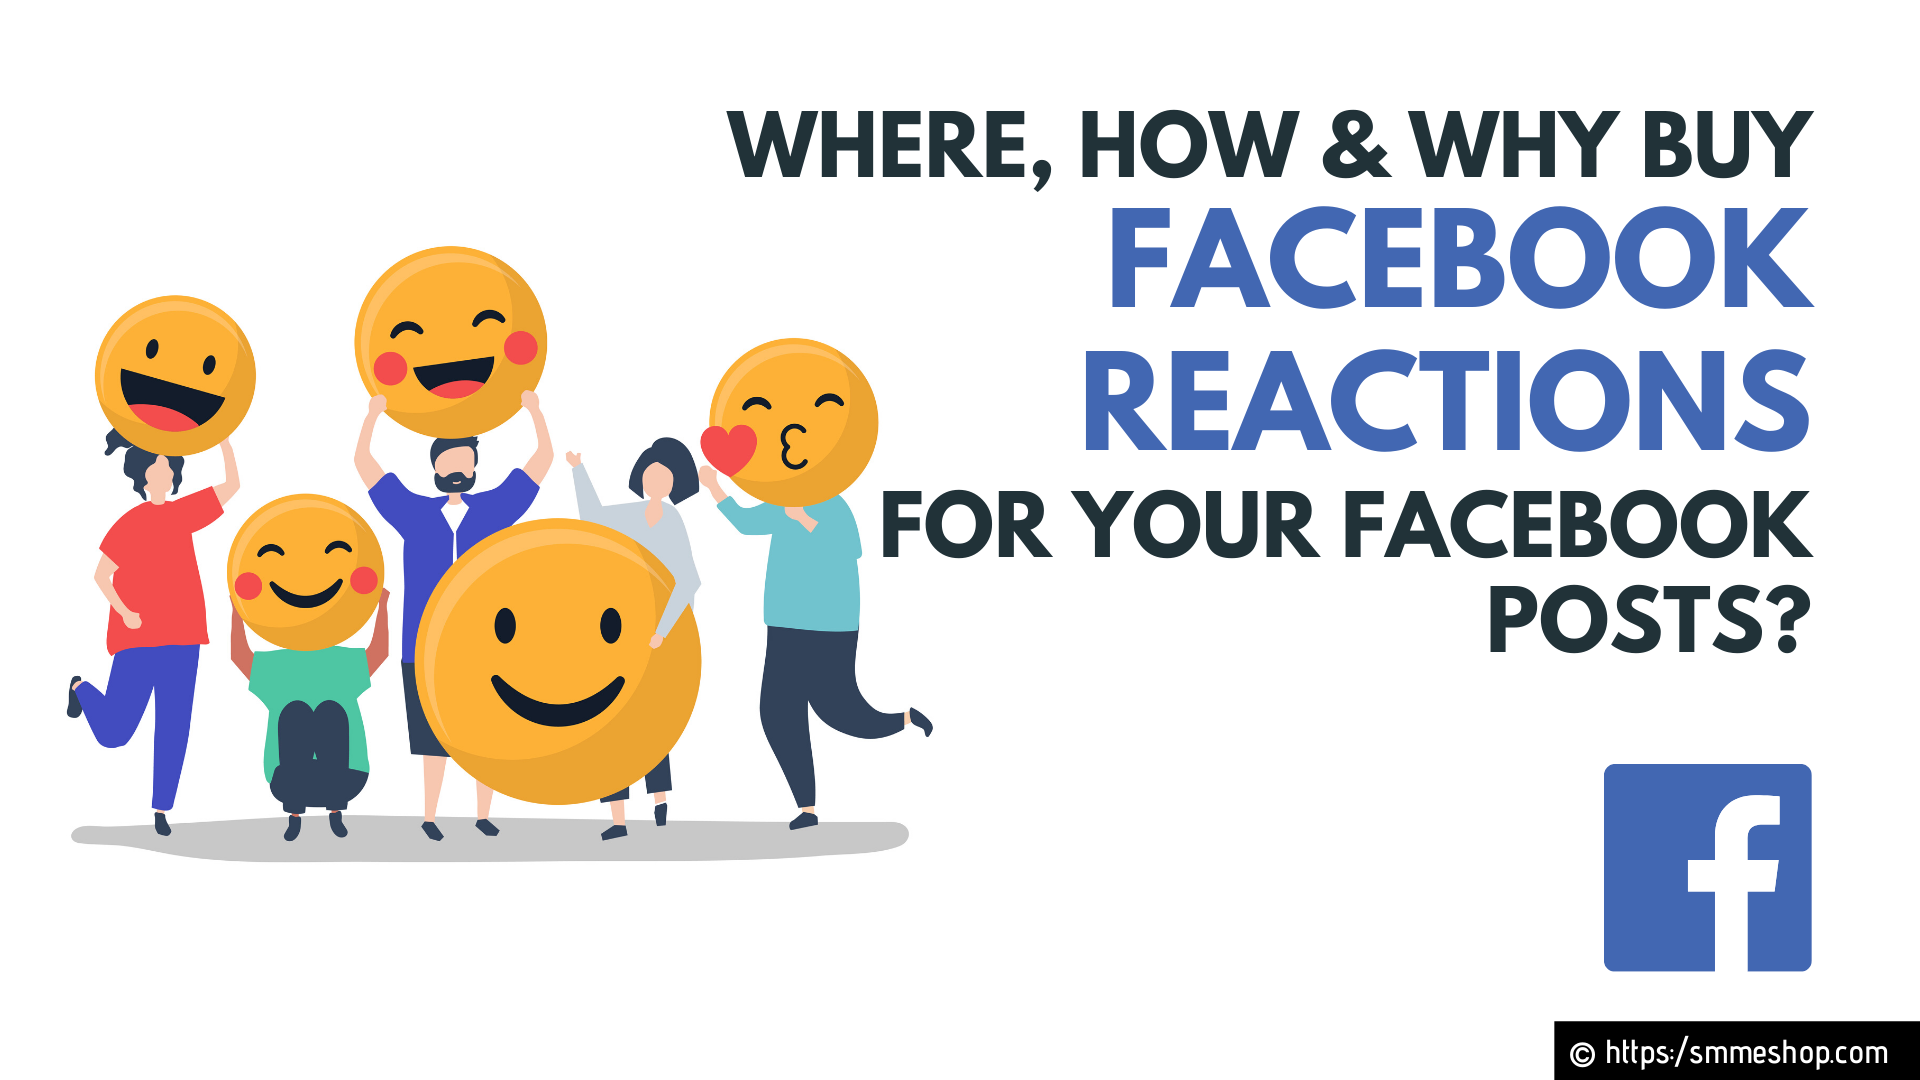 Where, How & Why Buy Facebook Reactions for your Facebook Posts?